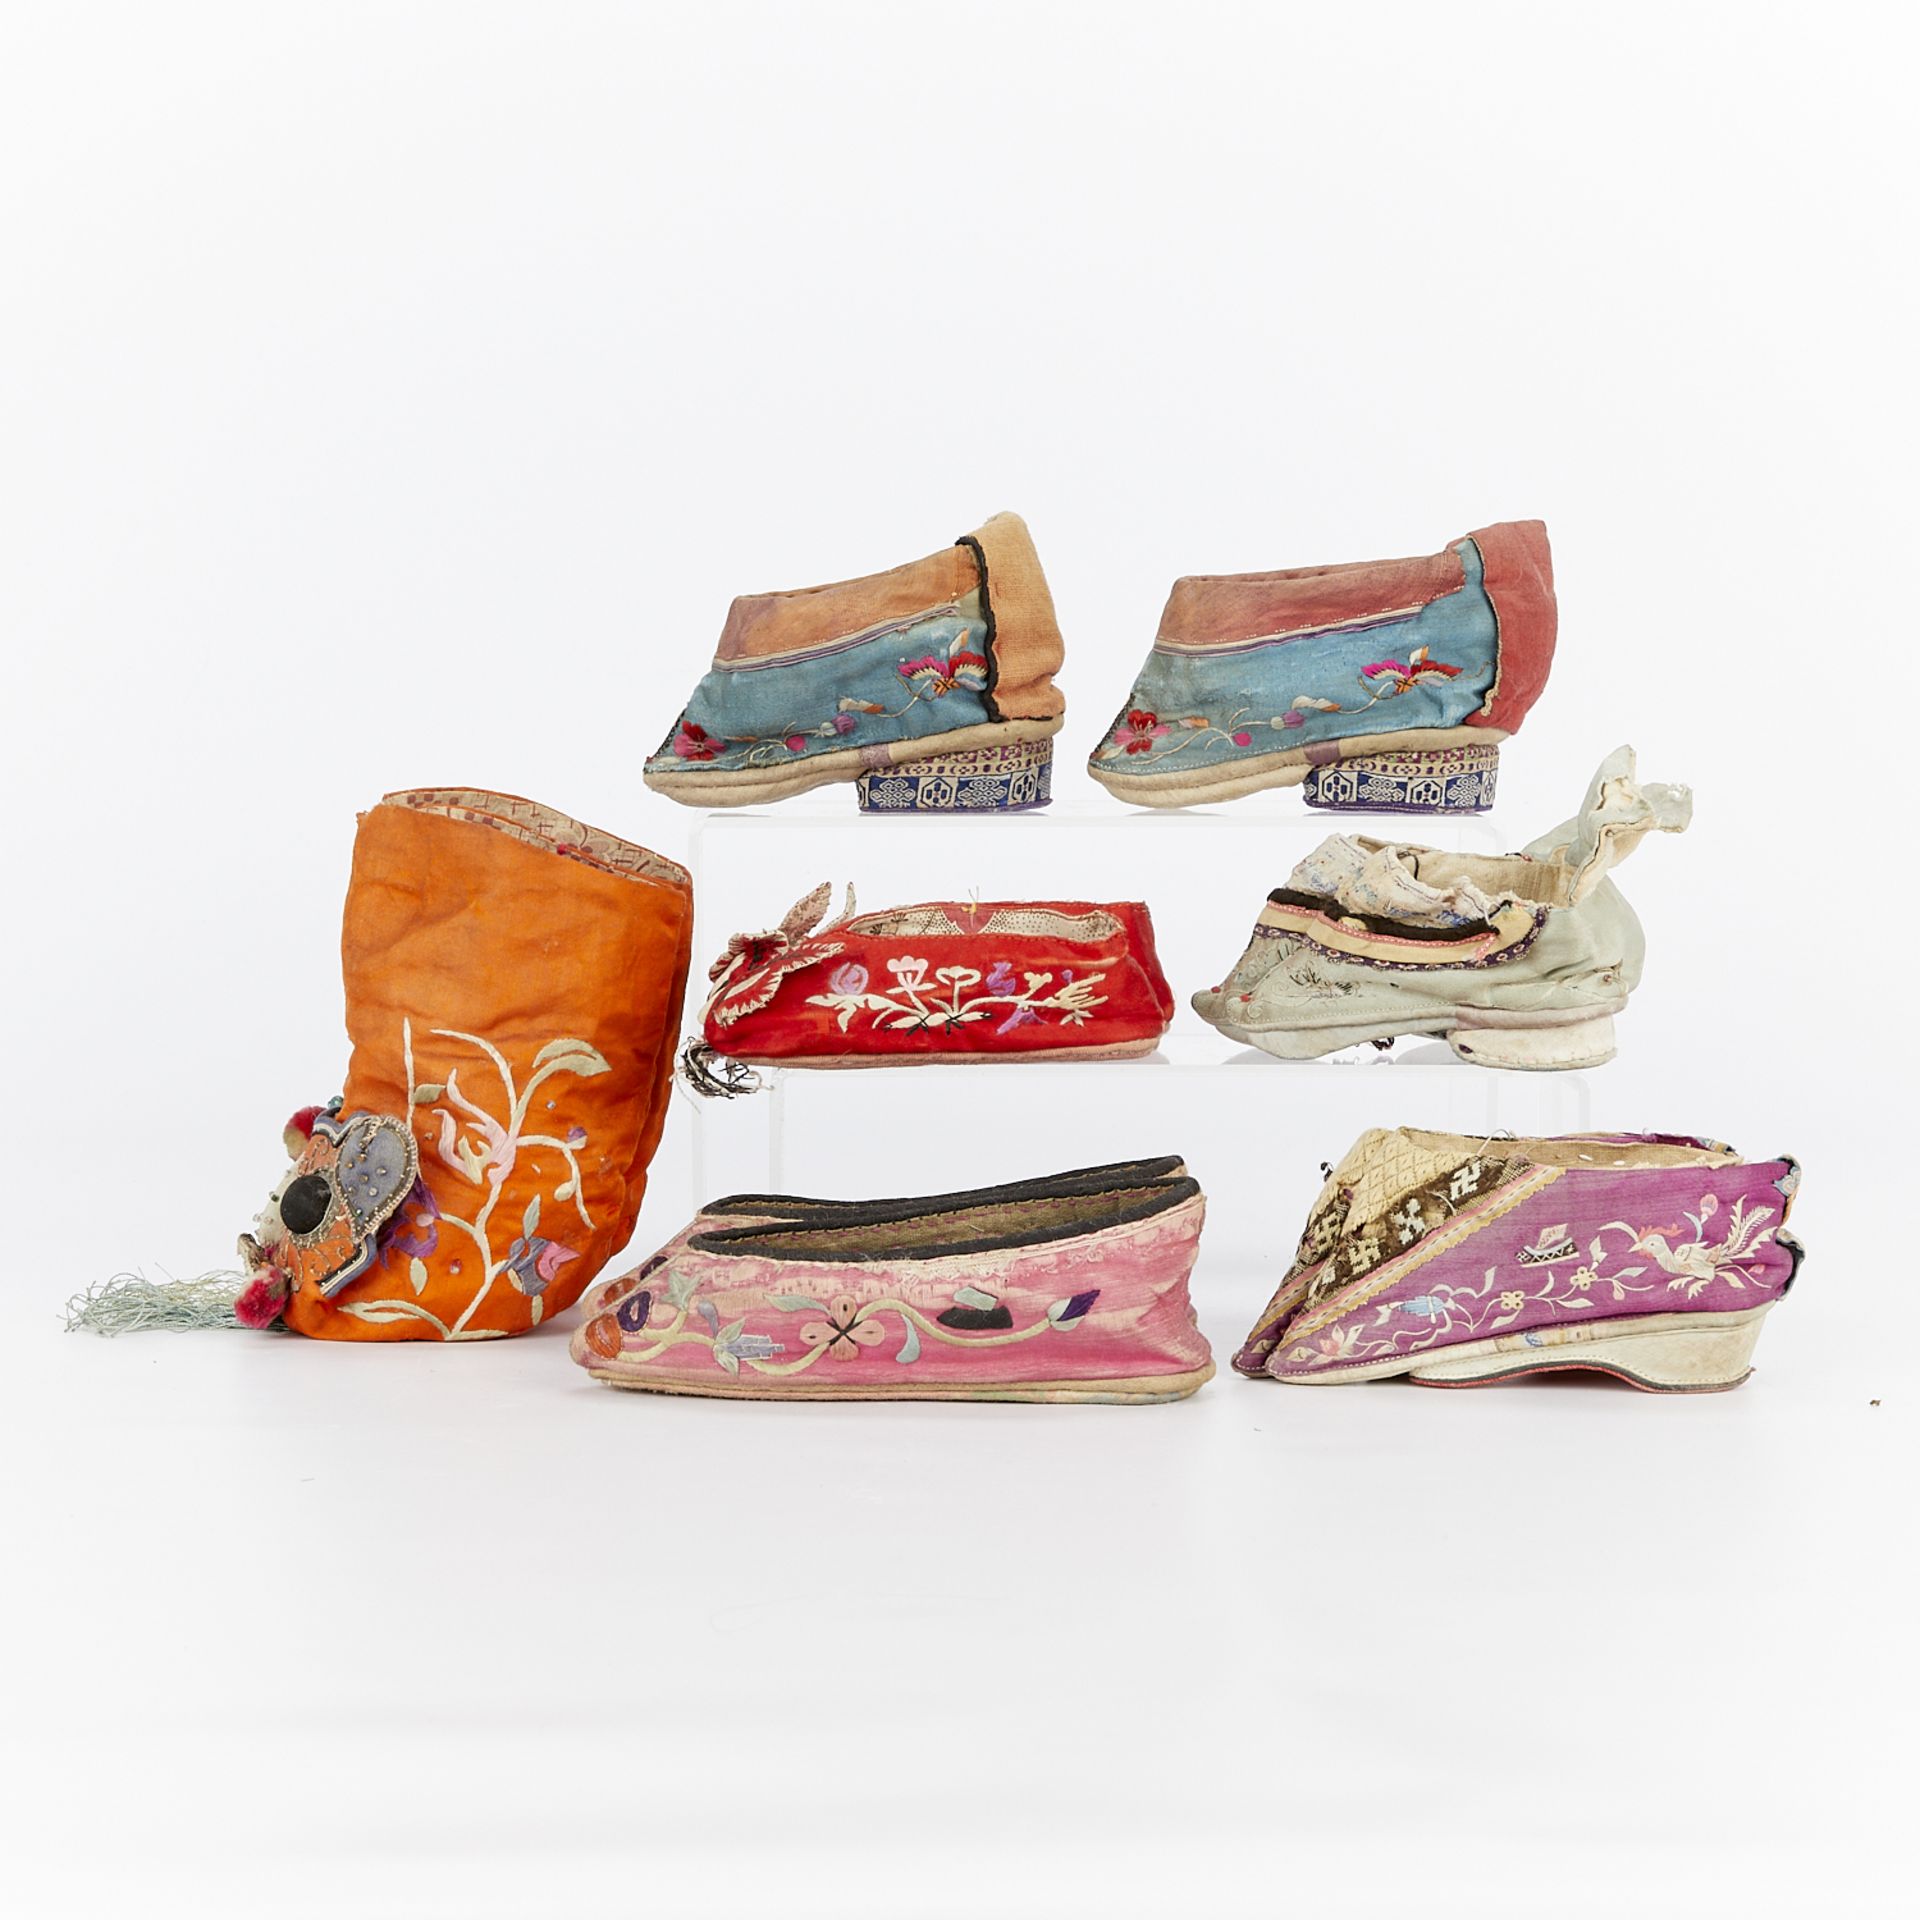 6 Pairs of Chinese Silk Foot Binding Shoes - Image 5 of 12